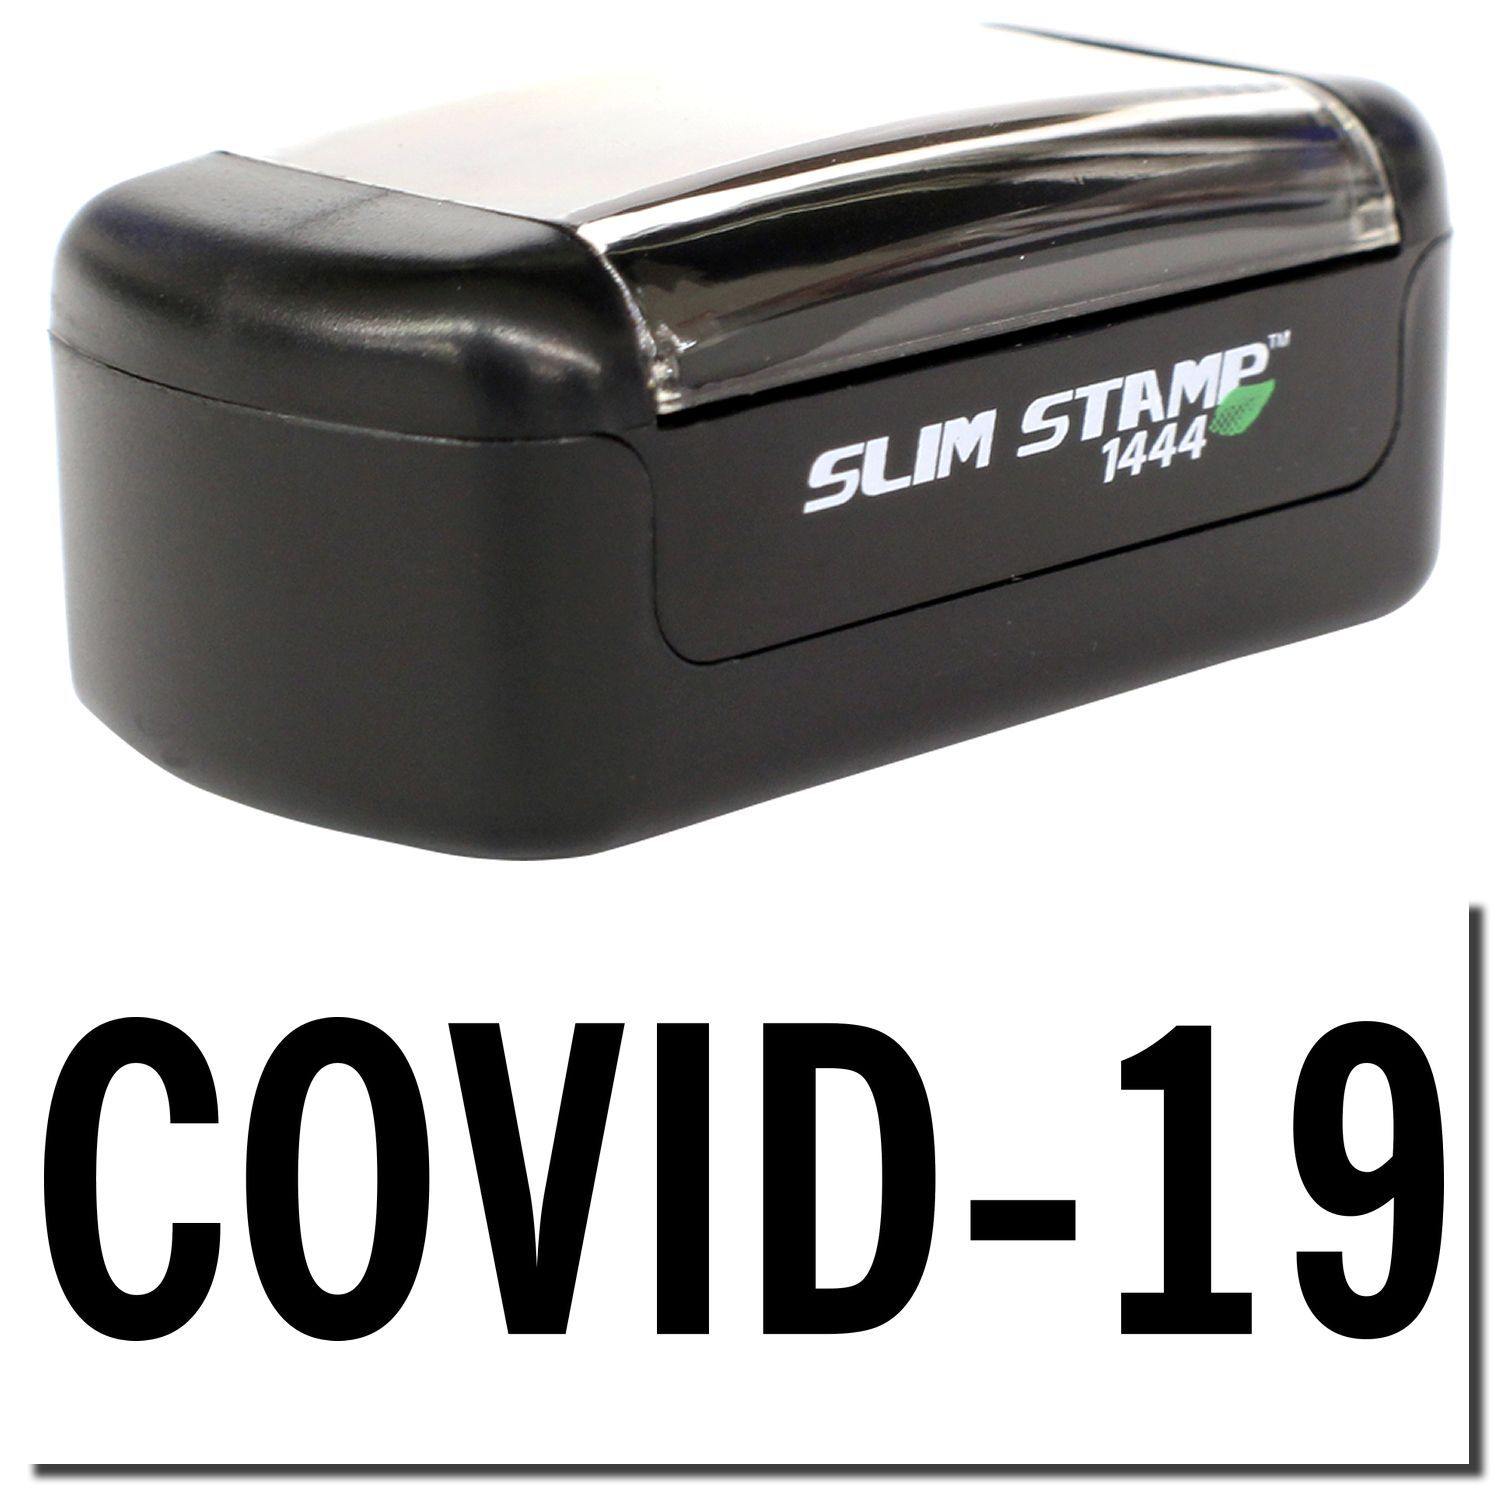 A stock office pre-inked stamp with a stamped image showing how the text "COVID-19" in bold font is displayed after stamping.